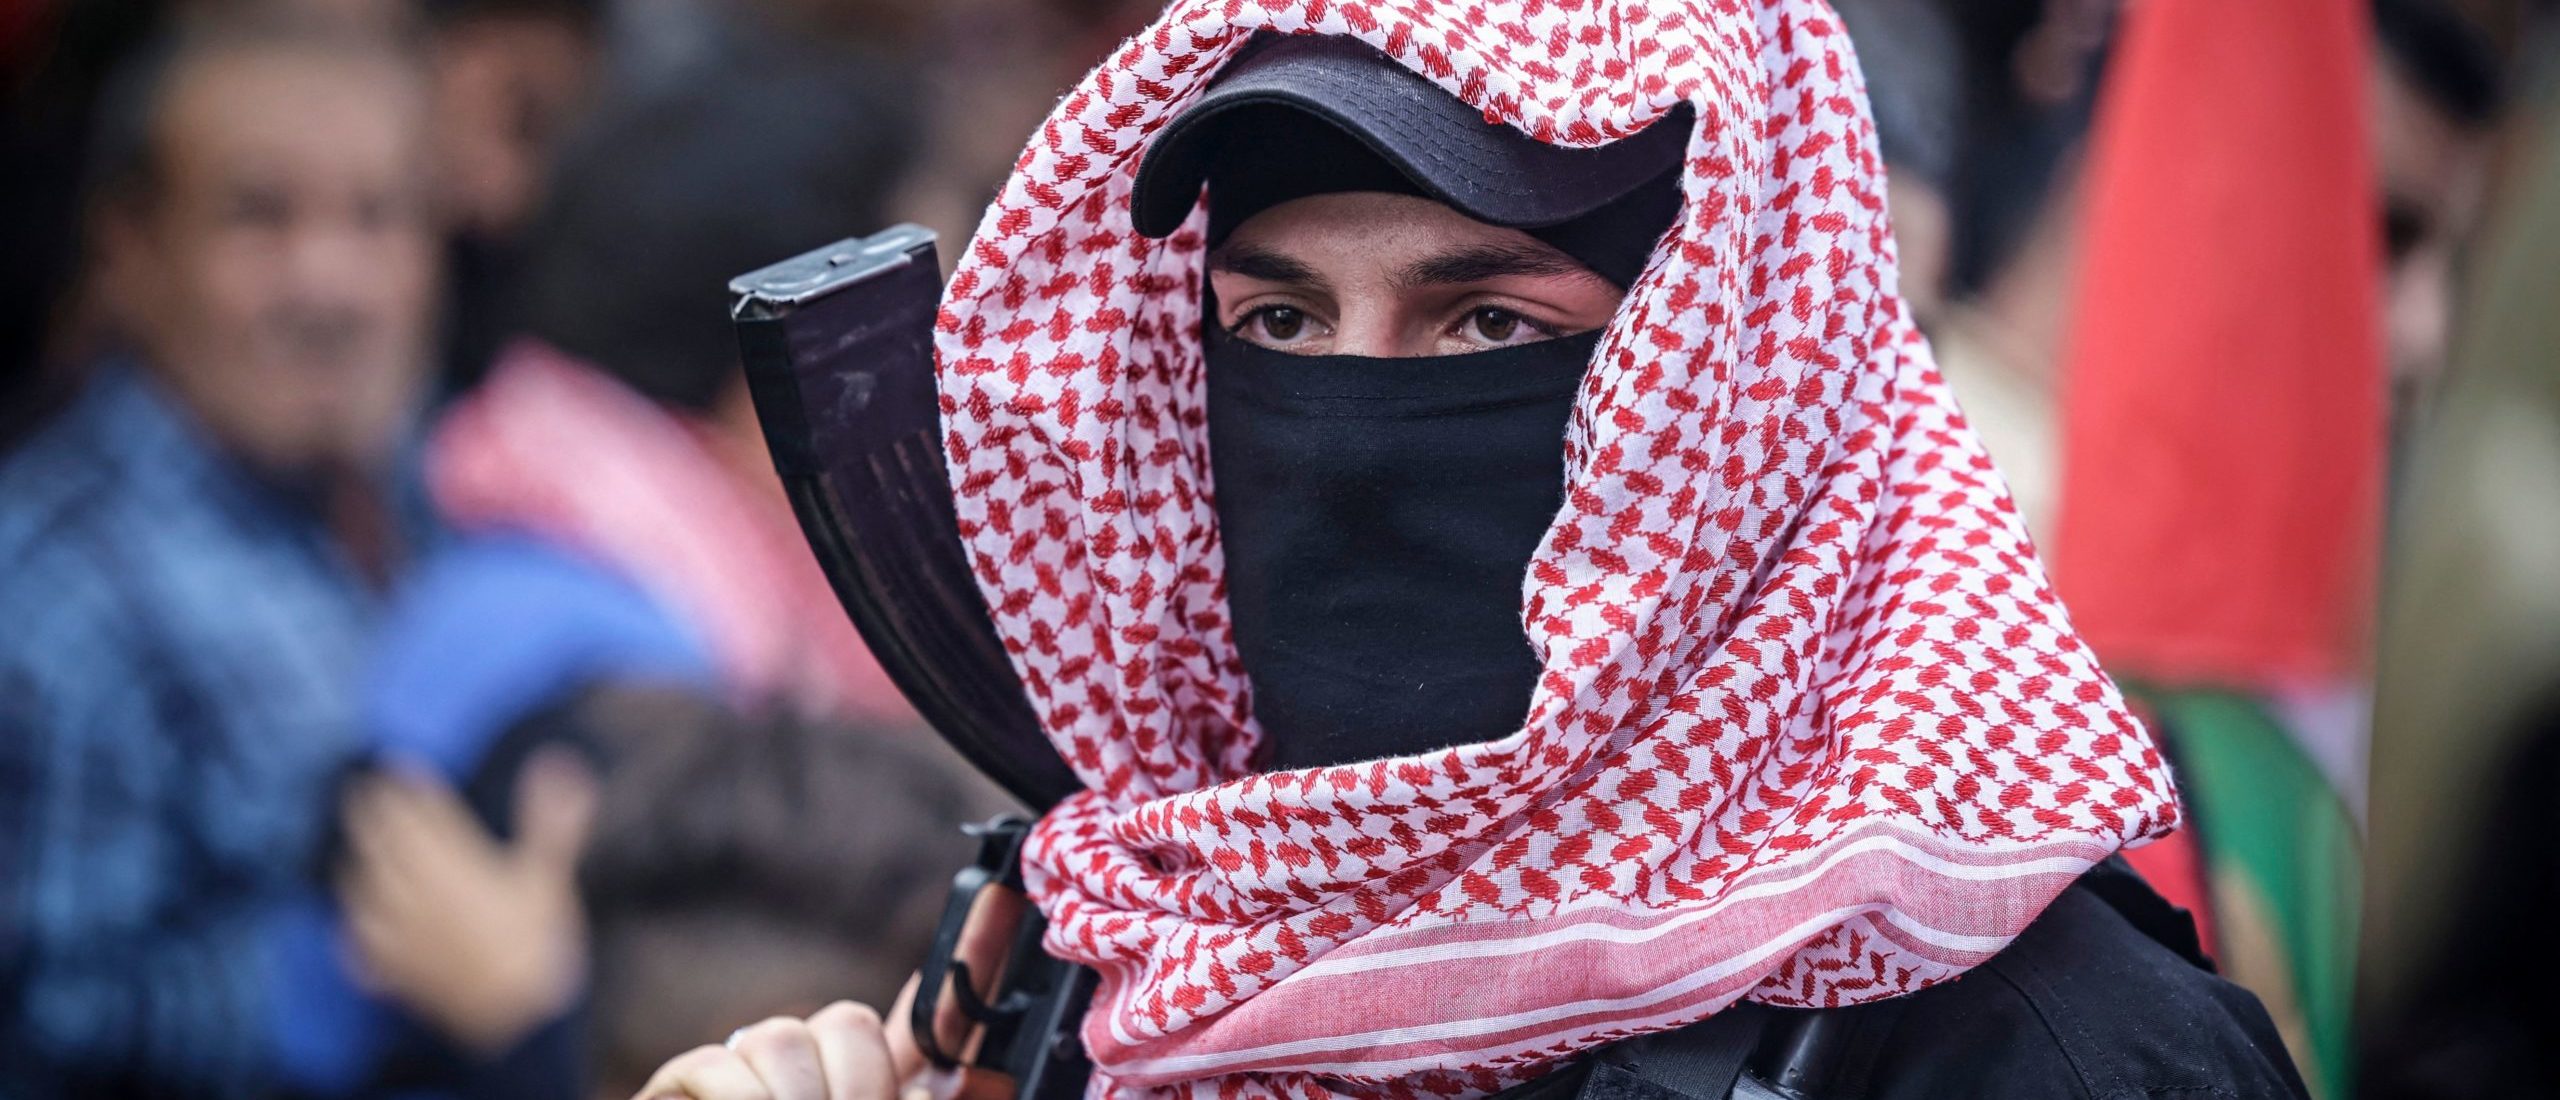 An armed member of the Popular Front for the Liberation of Palestine (PLFP) takes part in a rally marking the 56th anniversary of the movement's foundation in Gaza City on December 13, 2021.